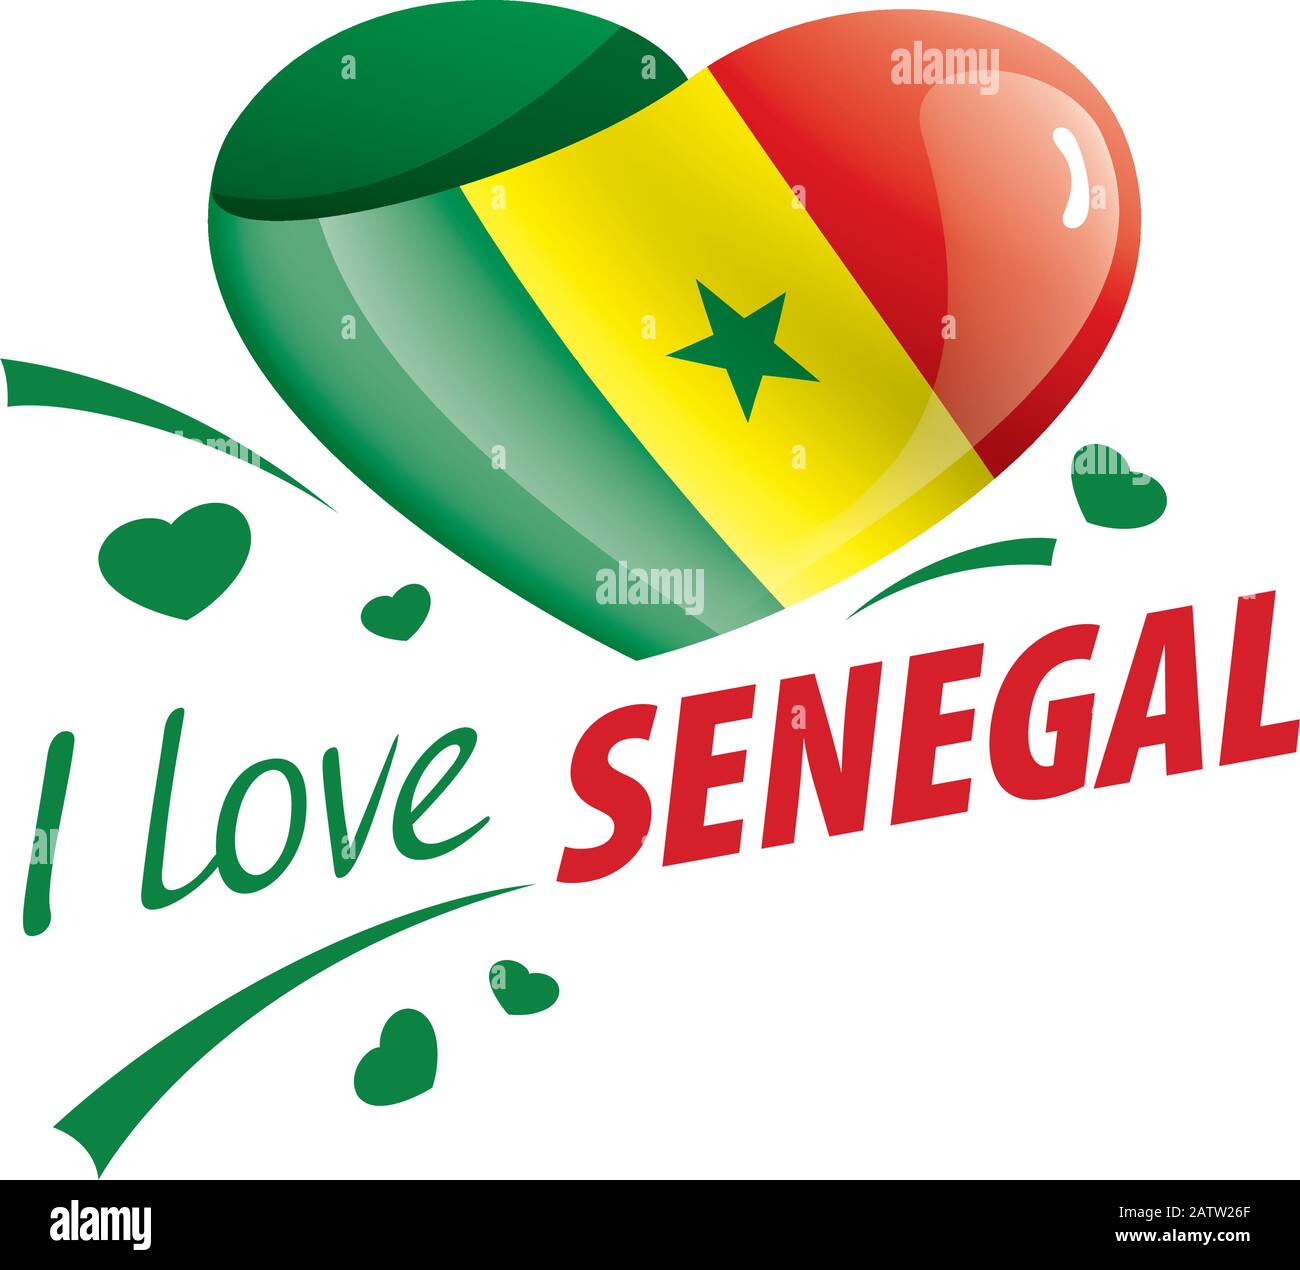 https://c8.alamy.com/comp/2ATW26F/national-flag-of-the-senegal-in-the-shape-of-a-heart-and-the-inscription-i-love-senegal-vector-illustration-2ATW26F.jpg